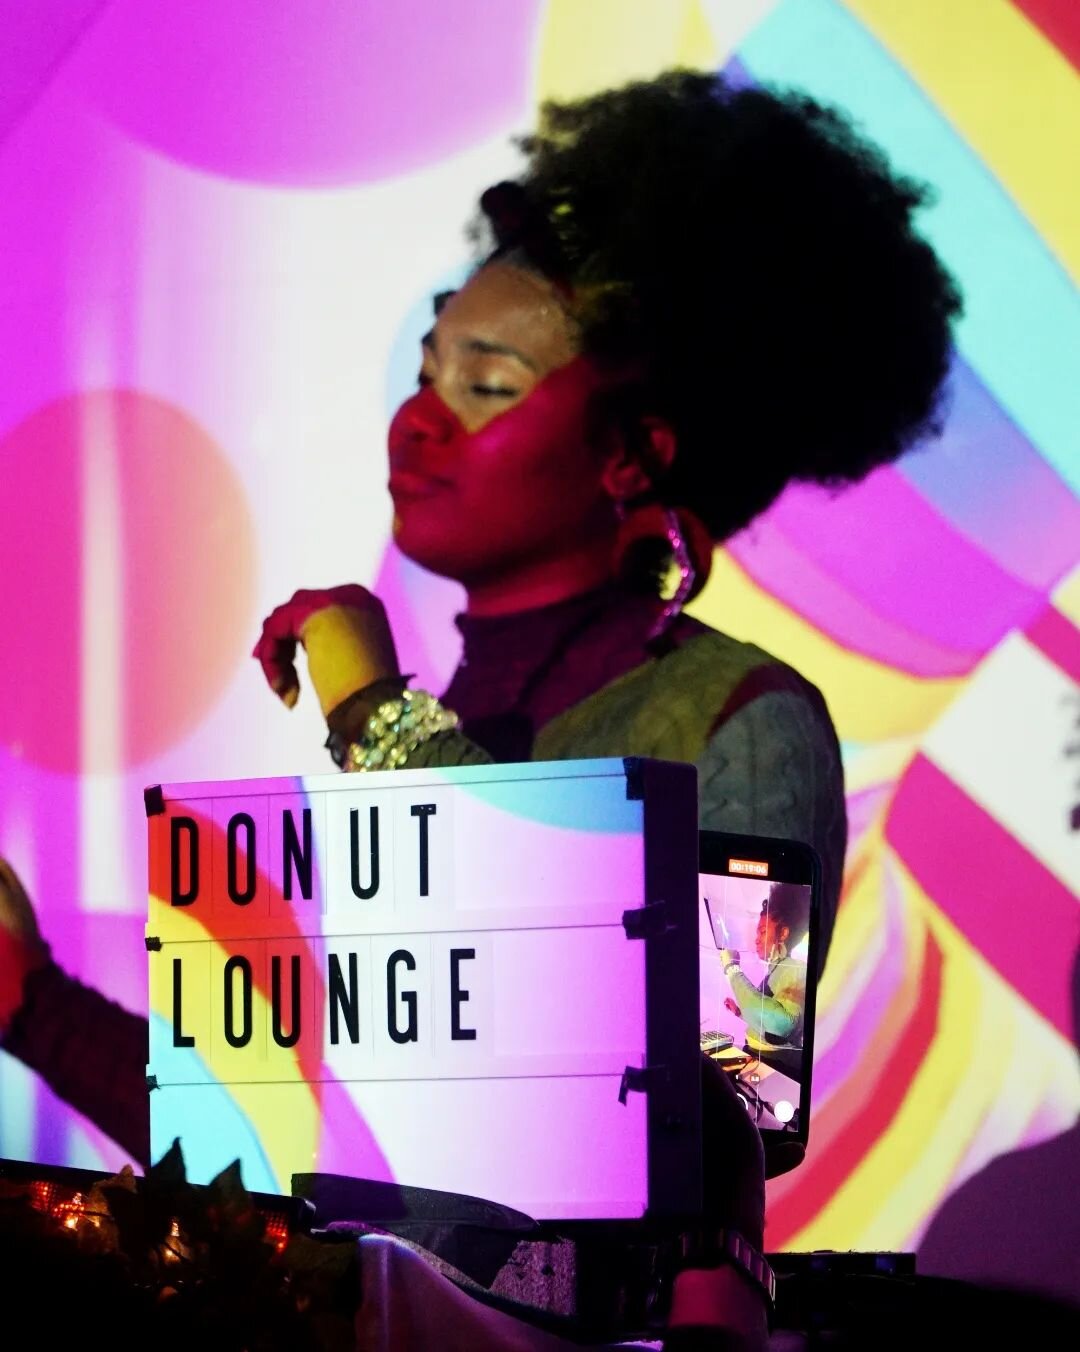 Some photos from last weekend by @lyricleroux 

Donut Lounge vol. 19